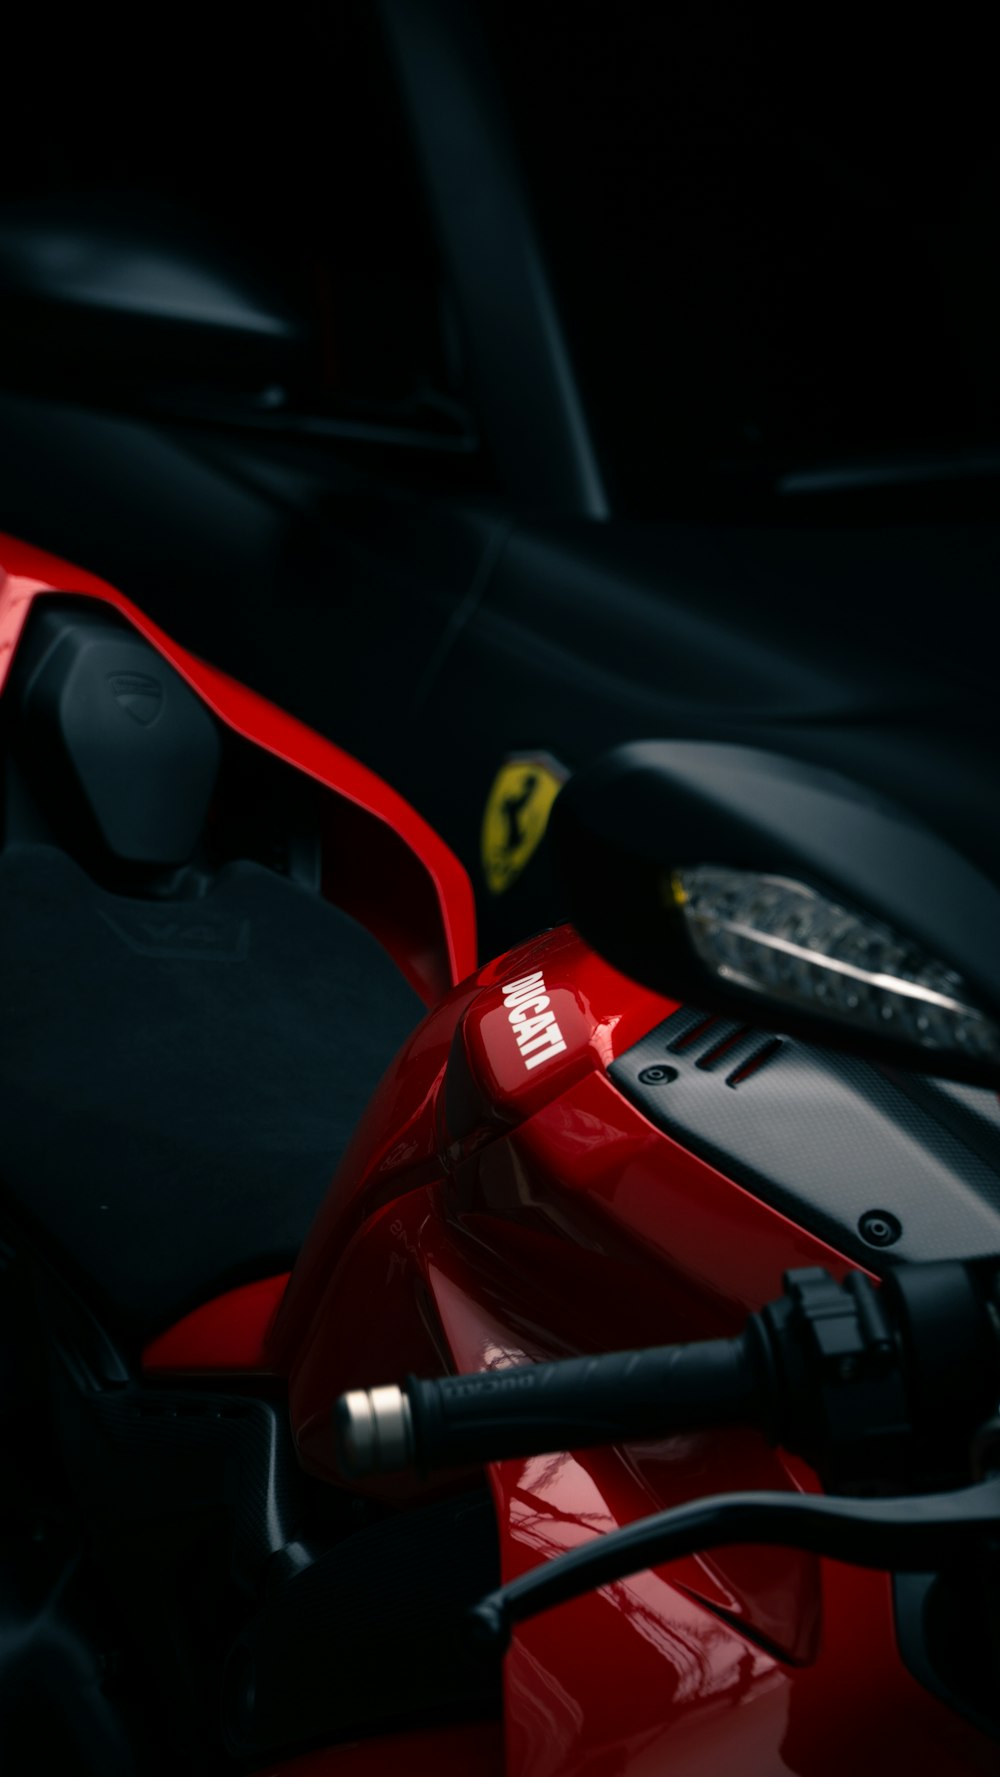 a close up of a red motorcycle with a black background